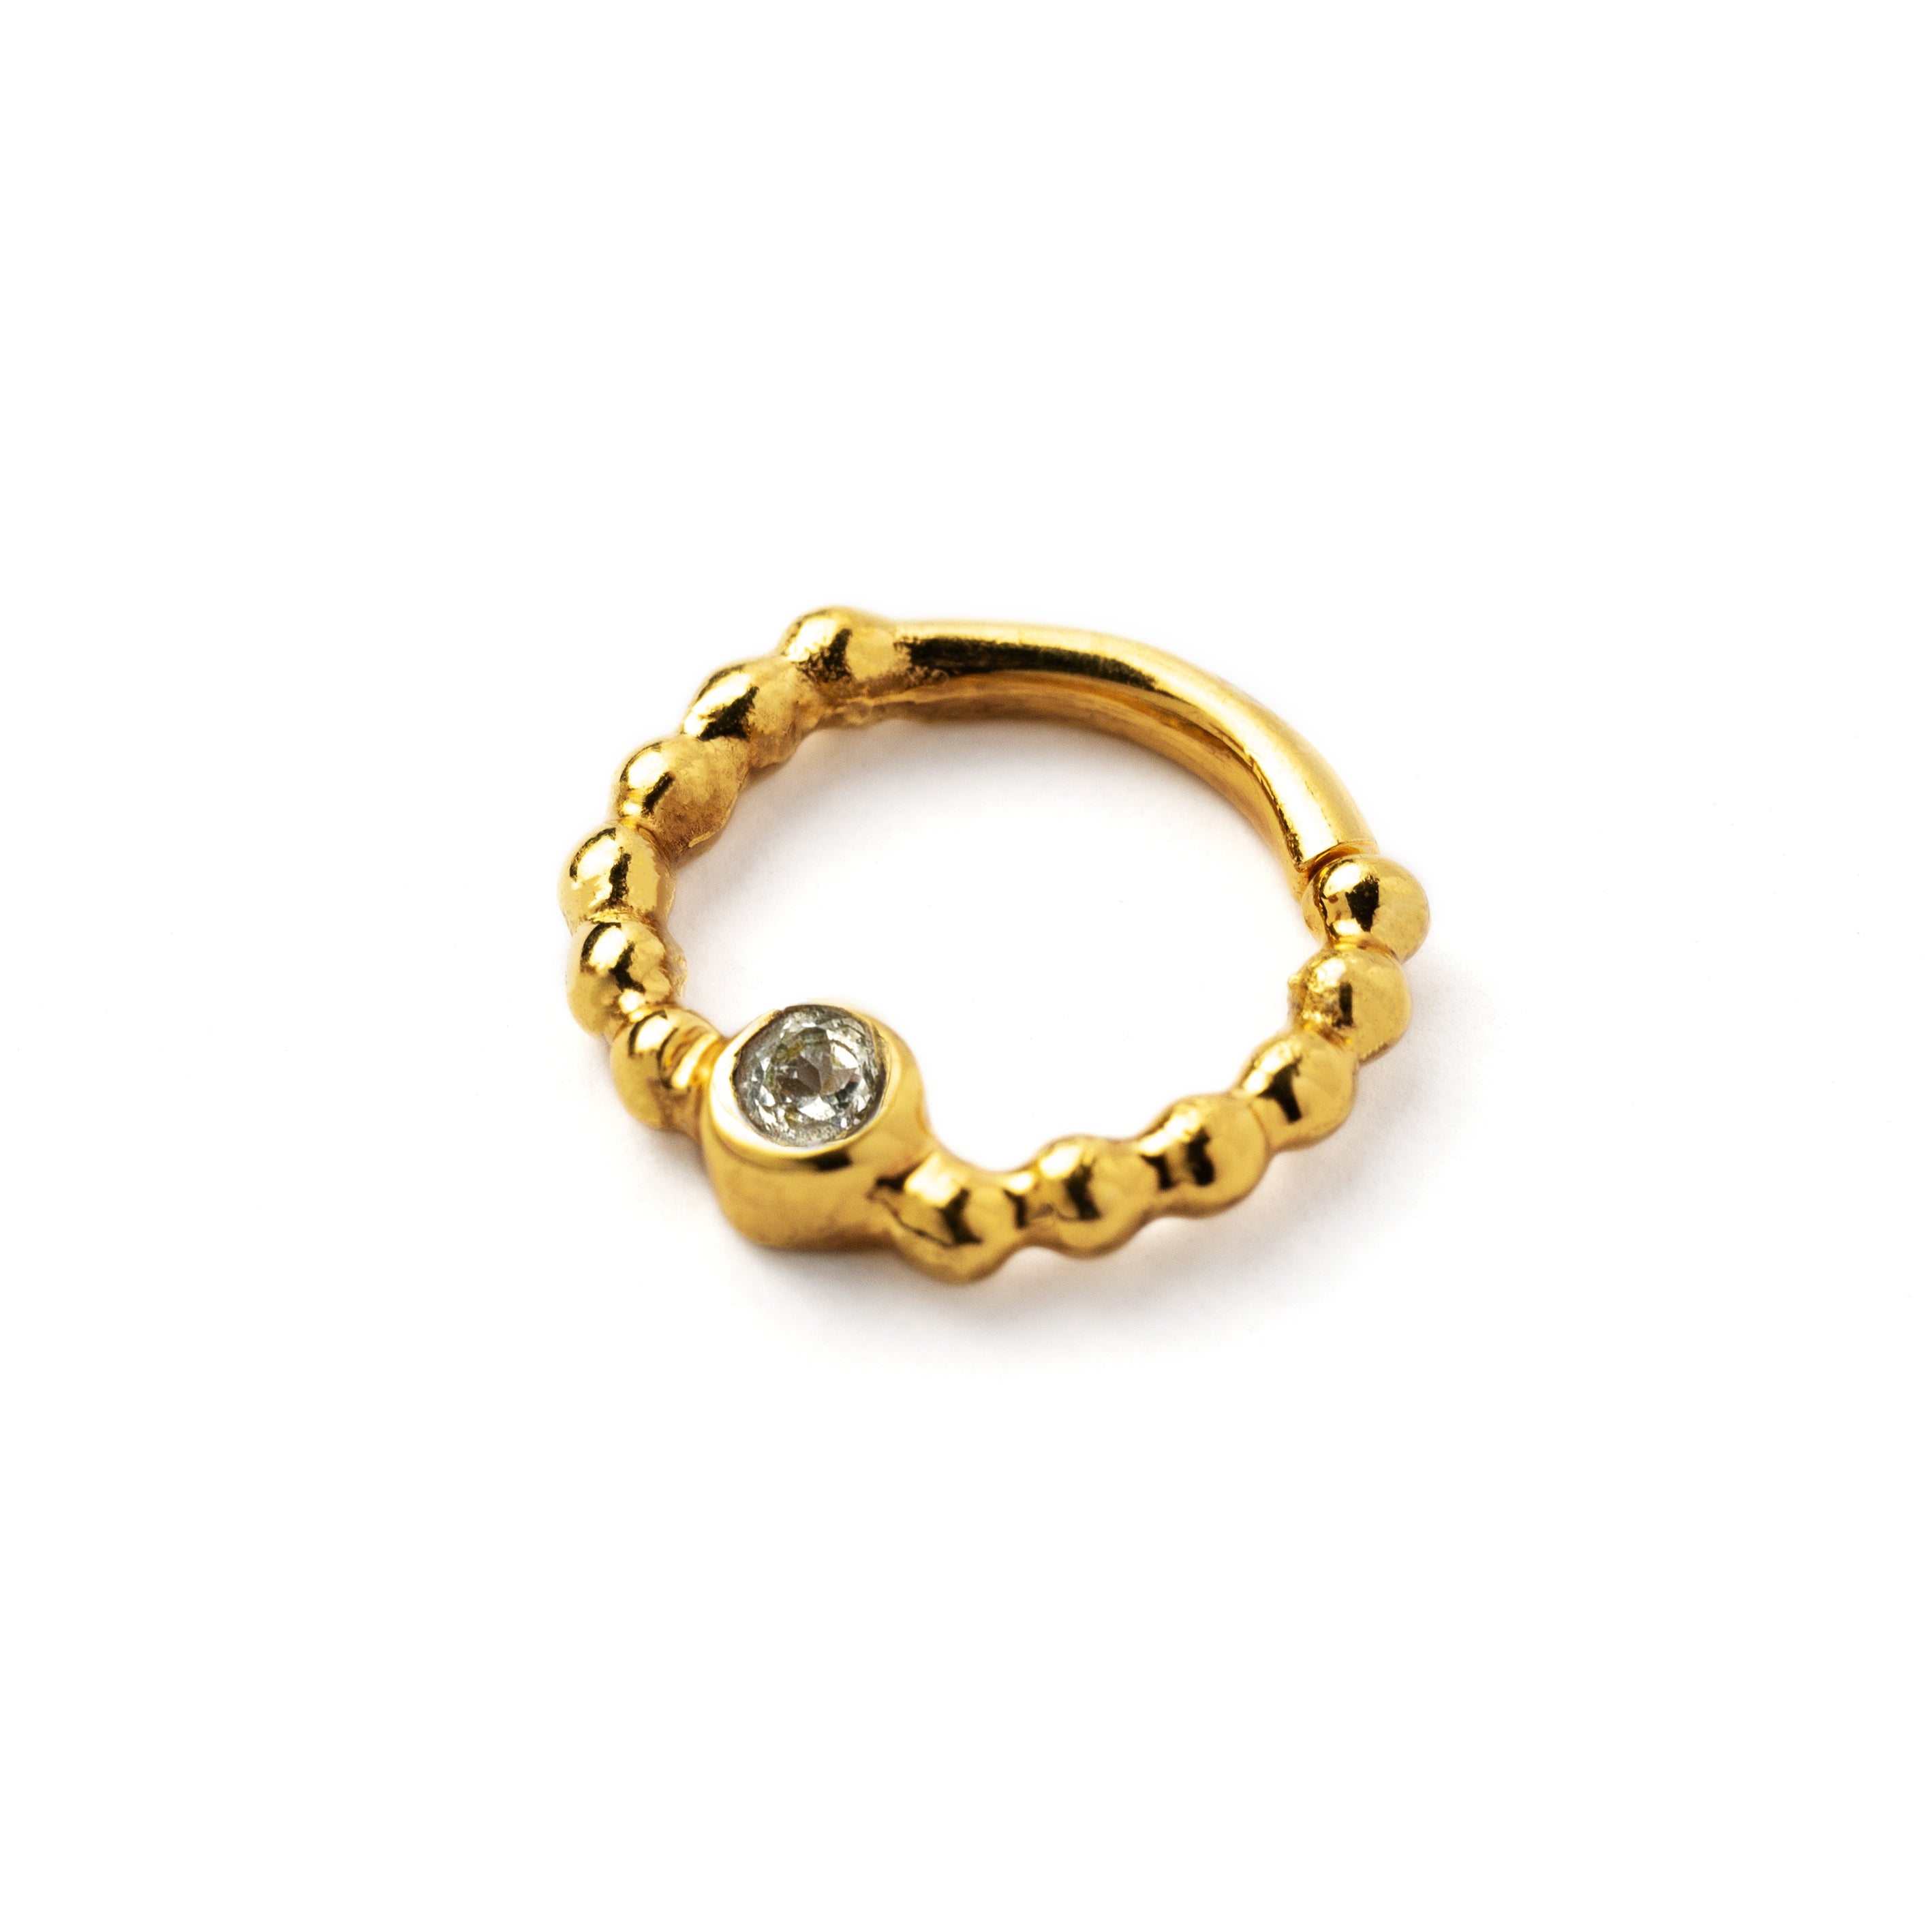 gold dotted septum ring with White Topaz gemstone left side view